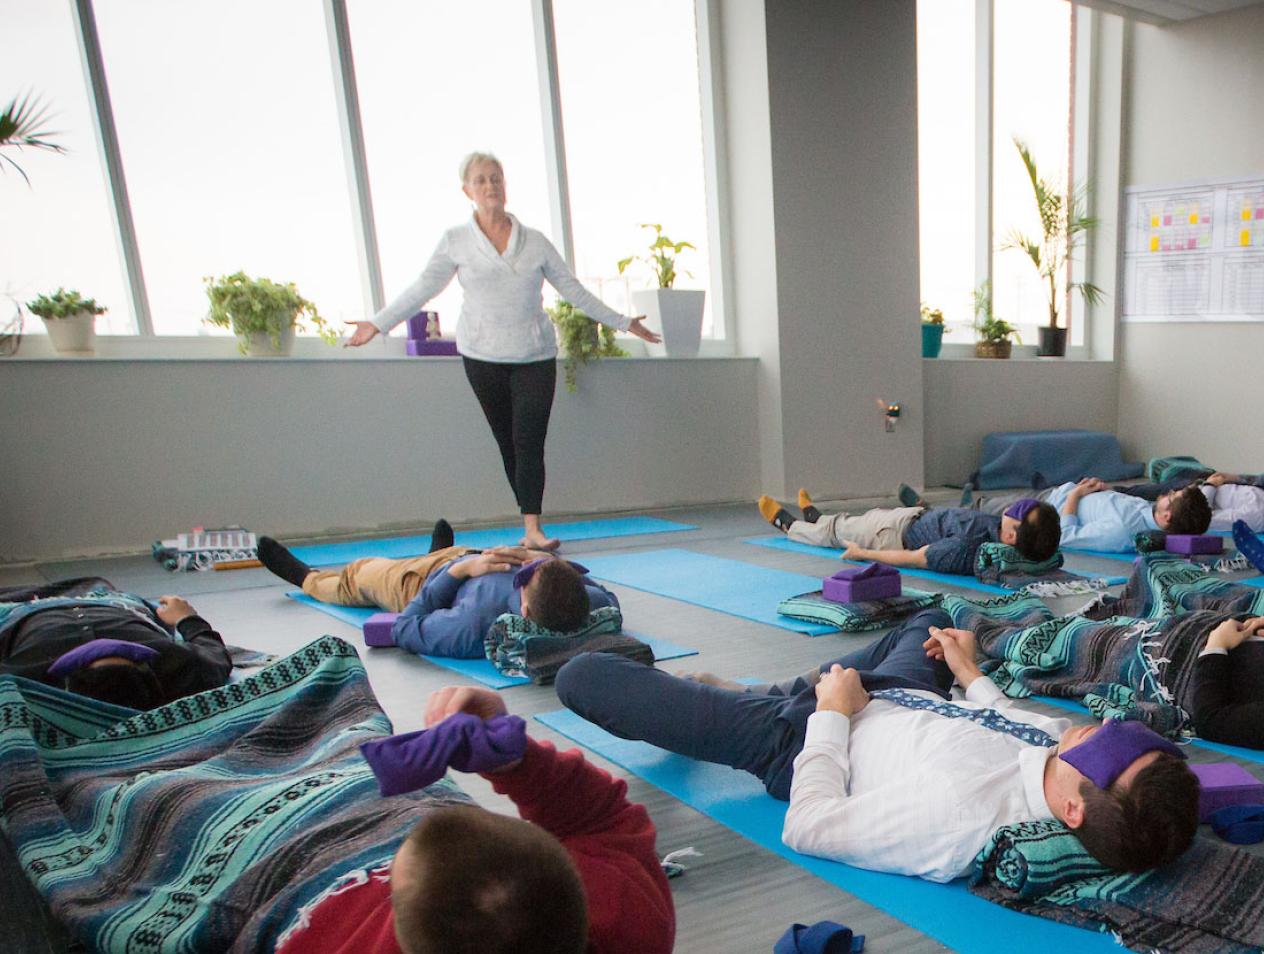 yoga participants relaxing in campus building setting.